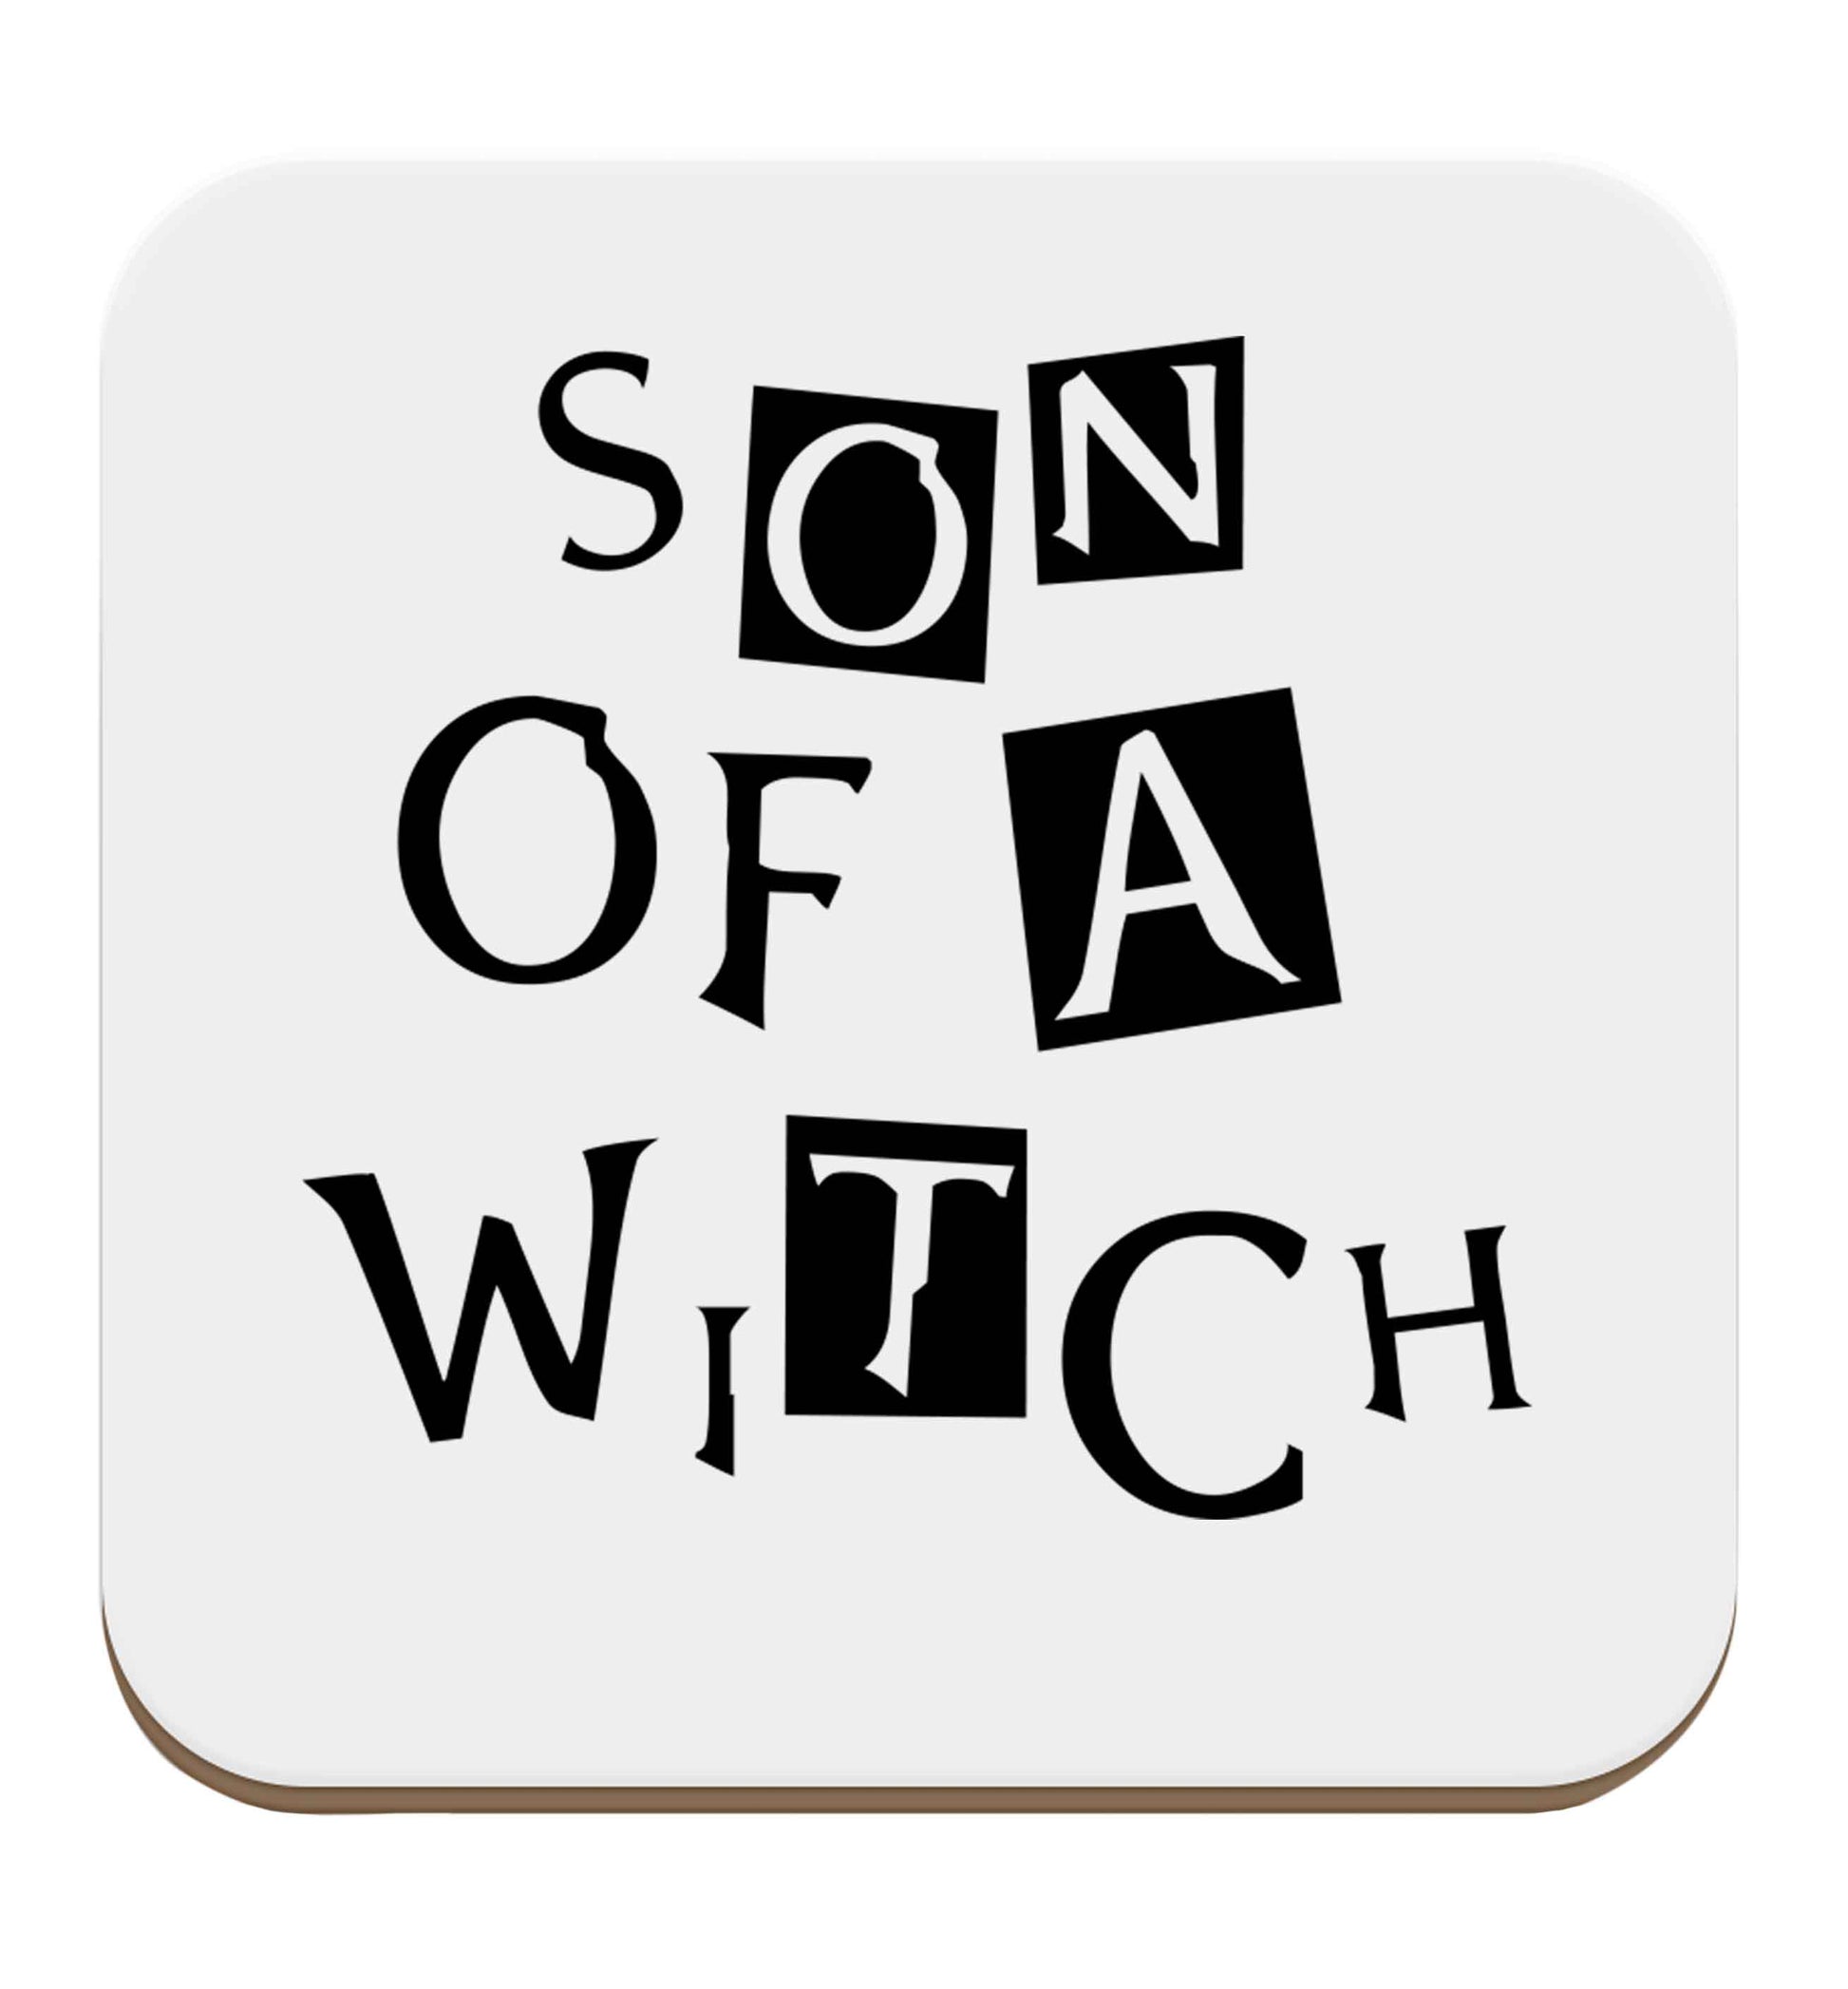 Son of a witch set of four coasters